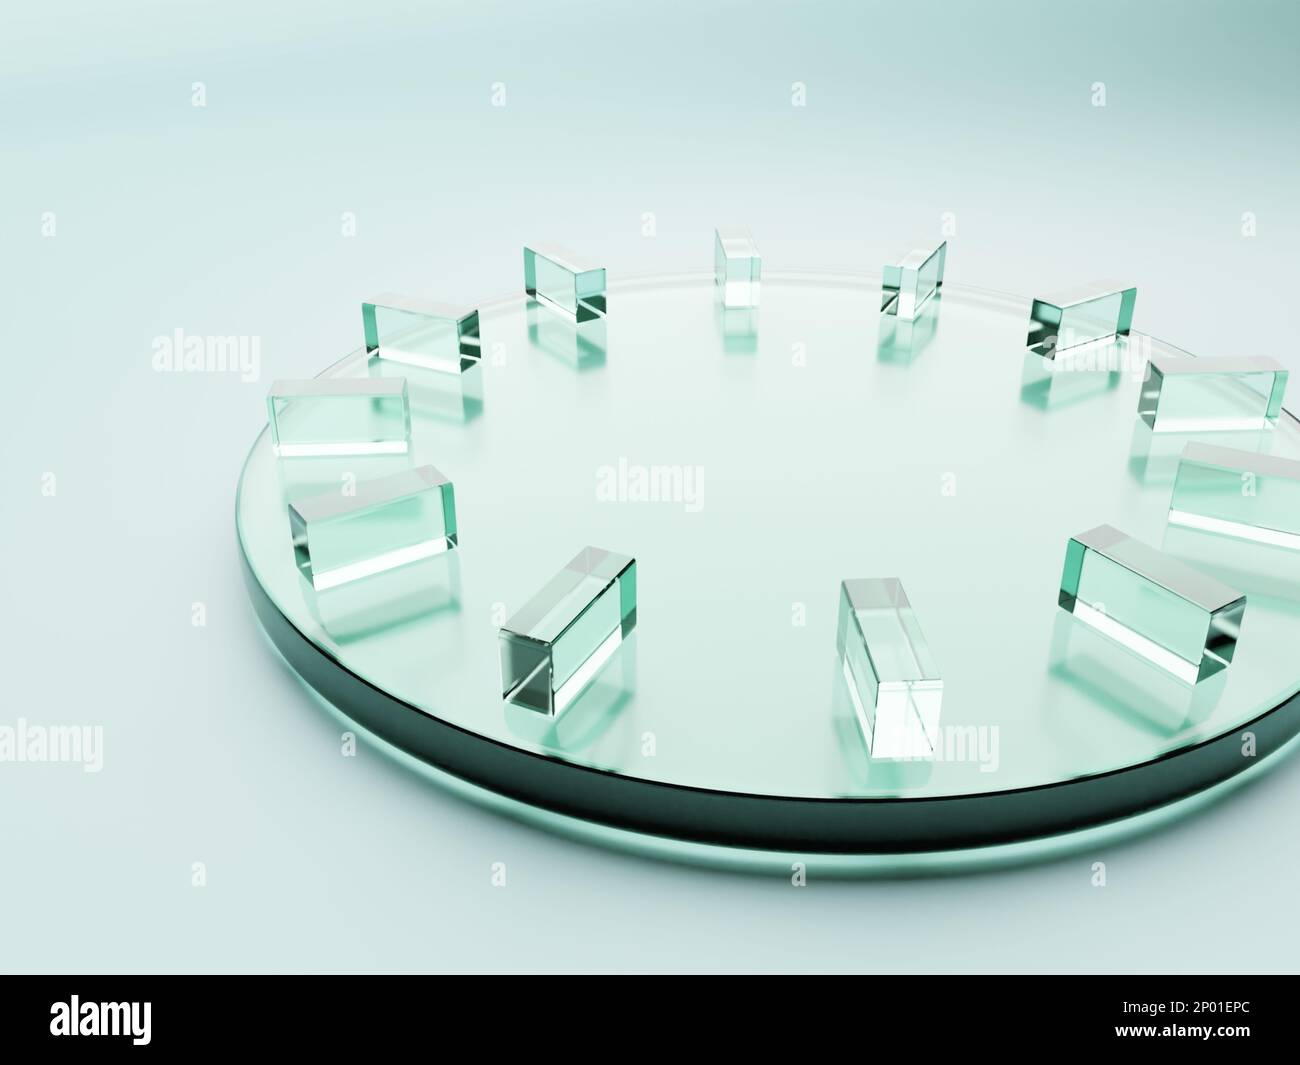 3D Rendering Geometric or Abstract Clock Shape Acrylic Glass Plates Product Display Background for Anti Aging Healthcare and Skincare Products. Stock Photo